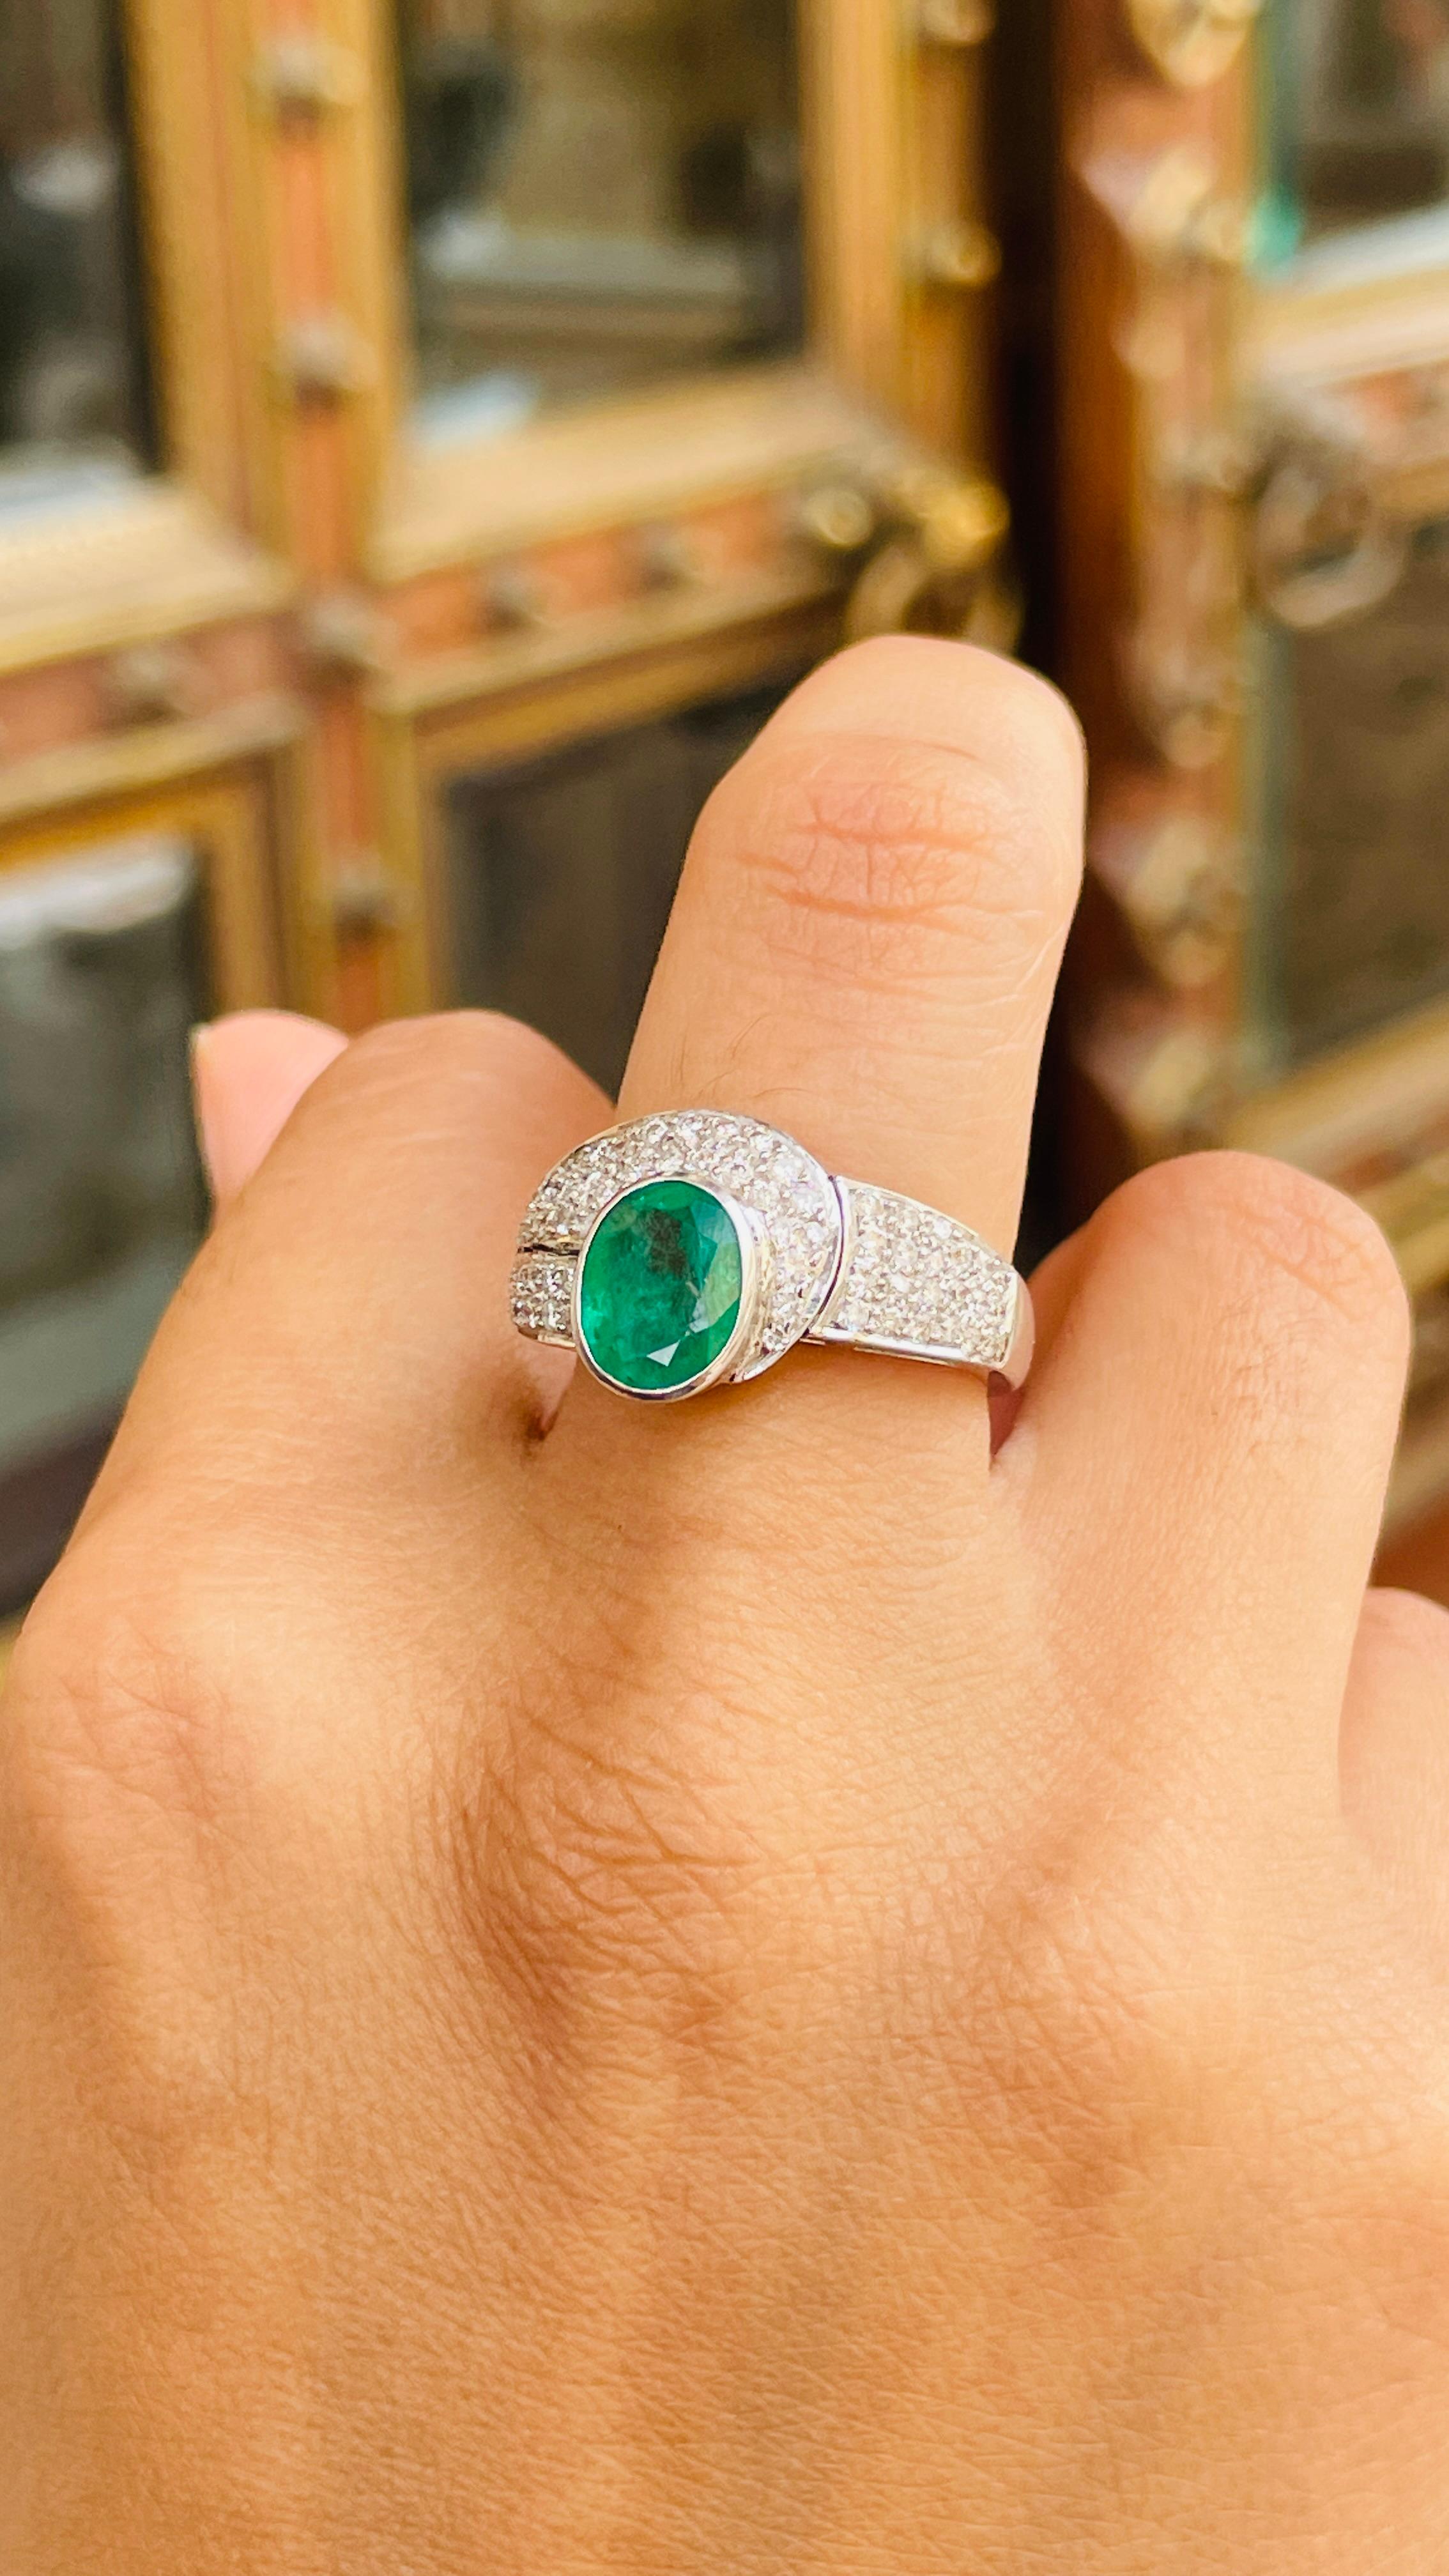 For Sale:  2.45 Carat Emerald and Diamond Ring in 18K White Gold  2